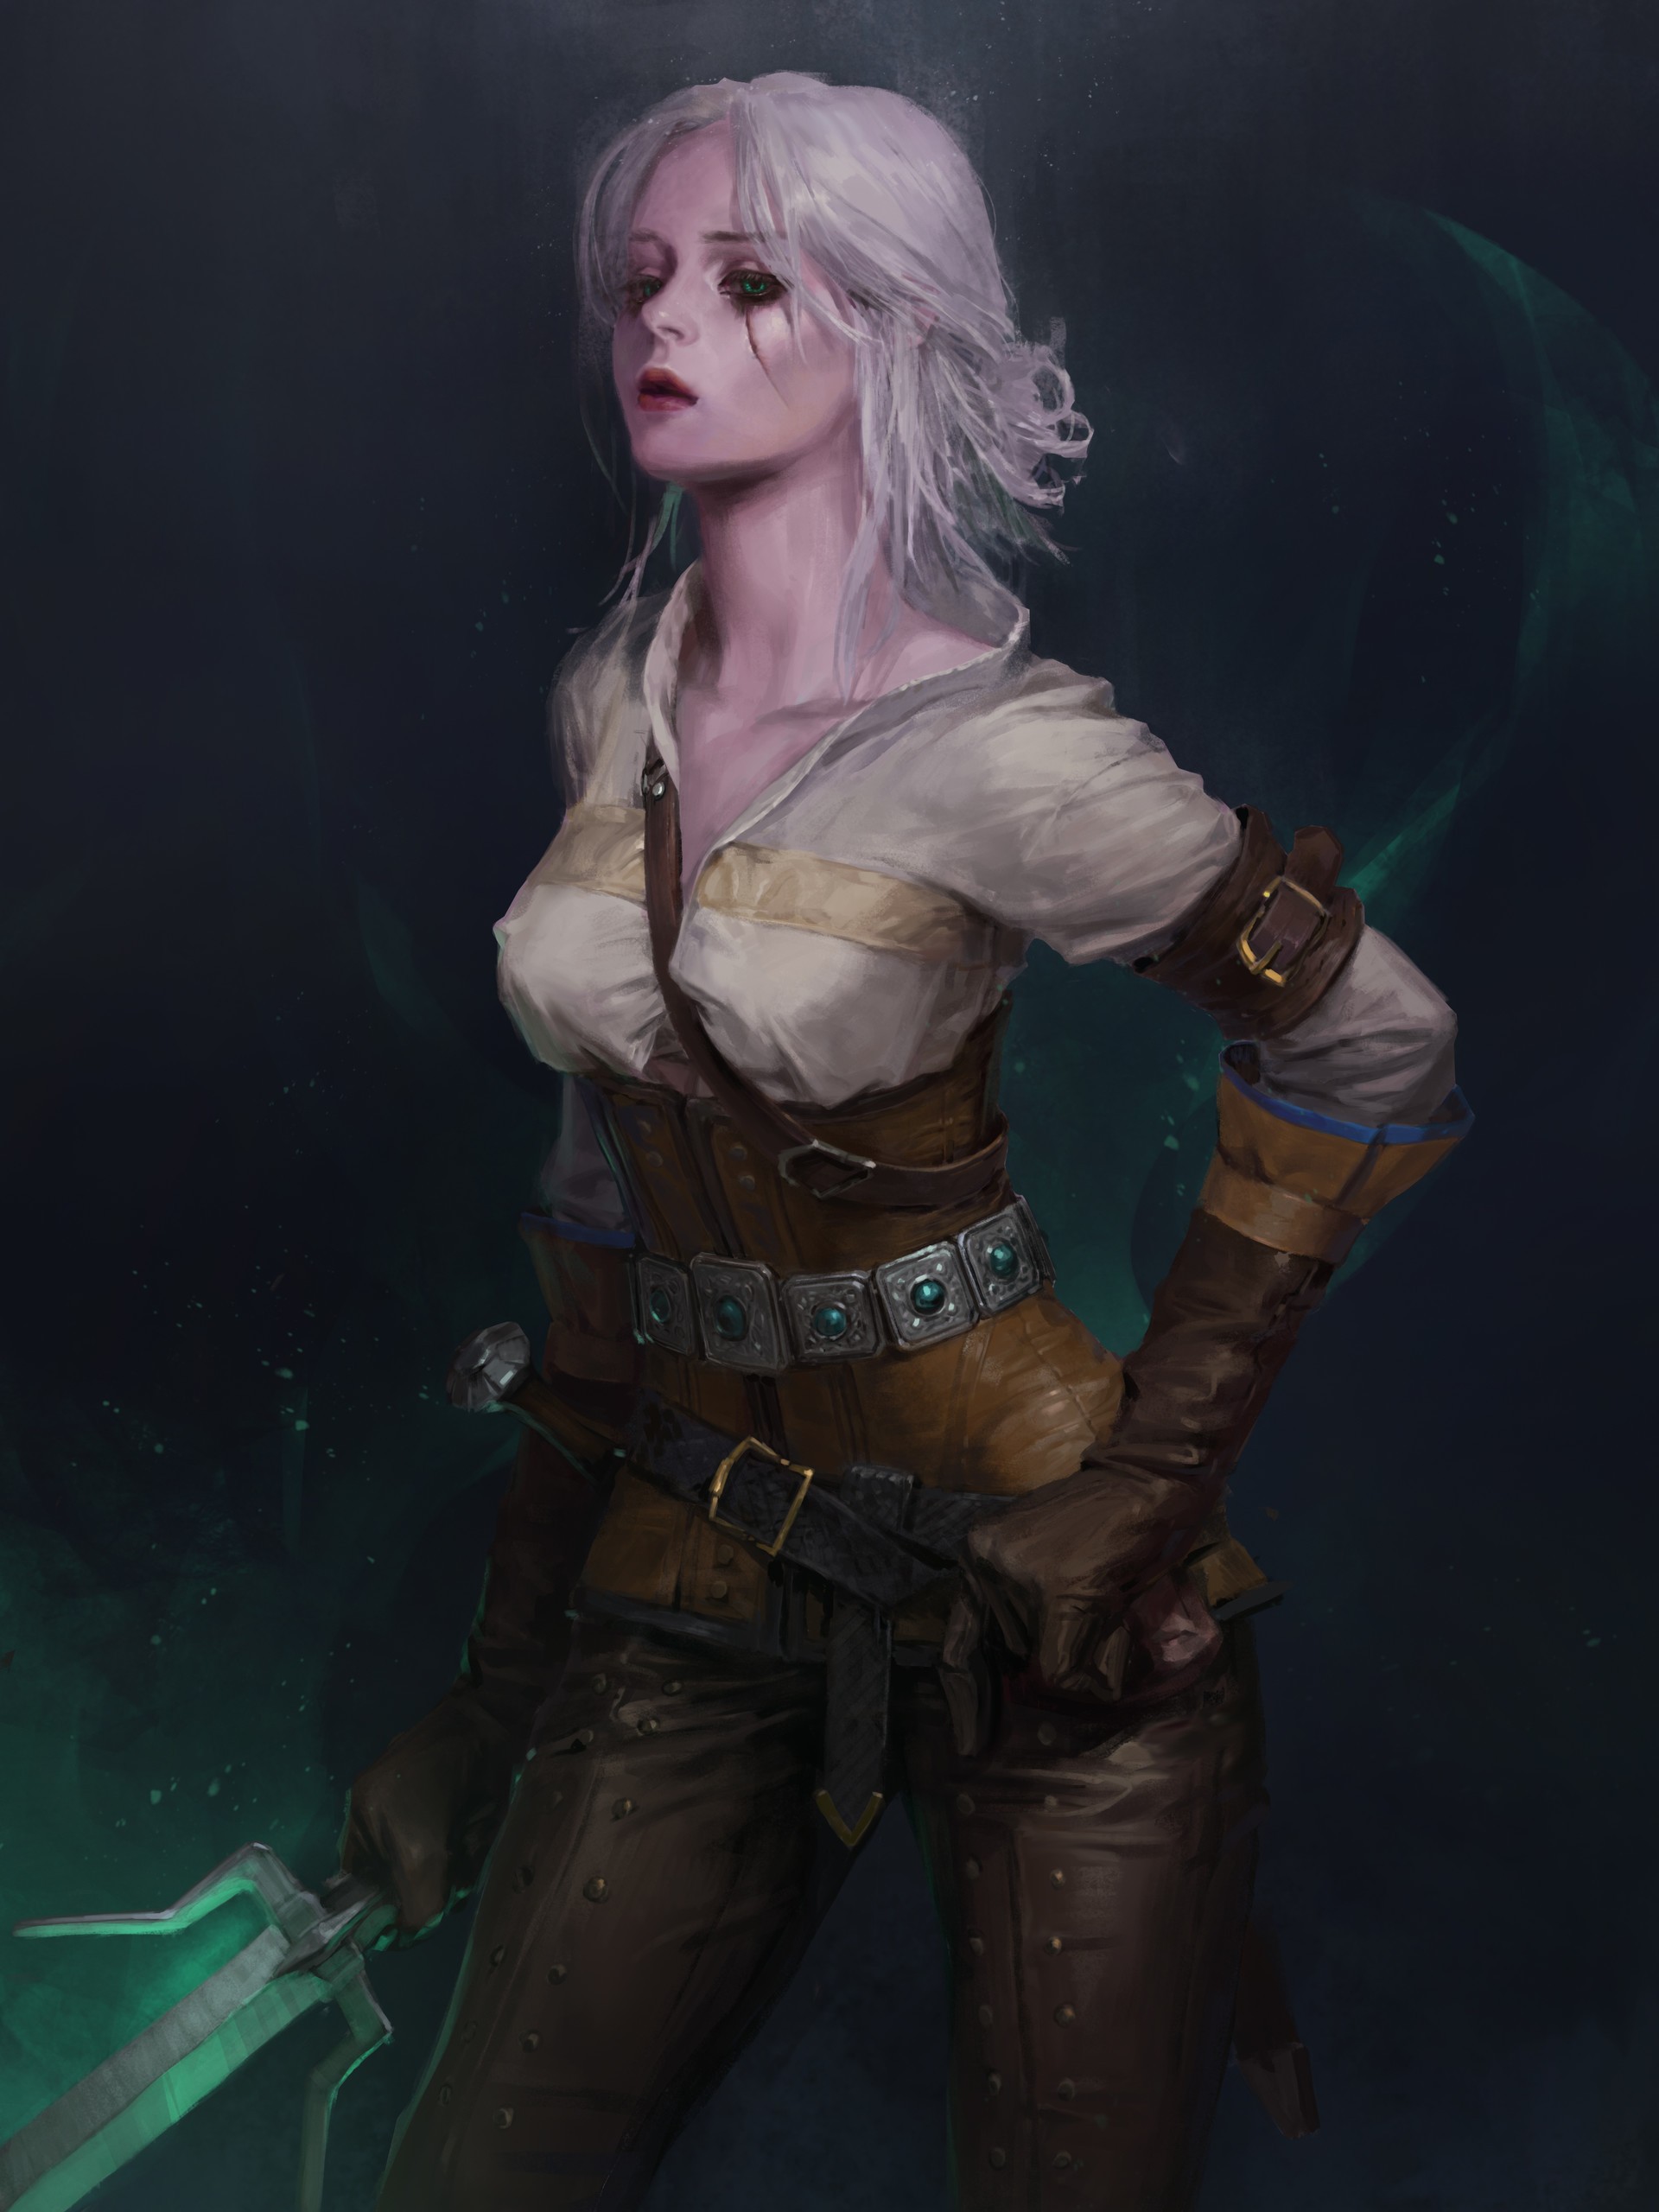 General 1920x2560 fantasy art The Witcher 3: Wild Hunt Cirilla Fiona Elen Riannon The Witcher video games fantasy girl video game girls video game characters RPG PC gaming